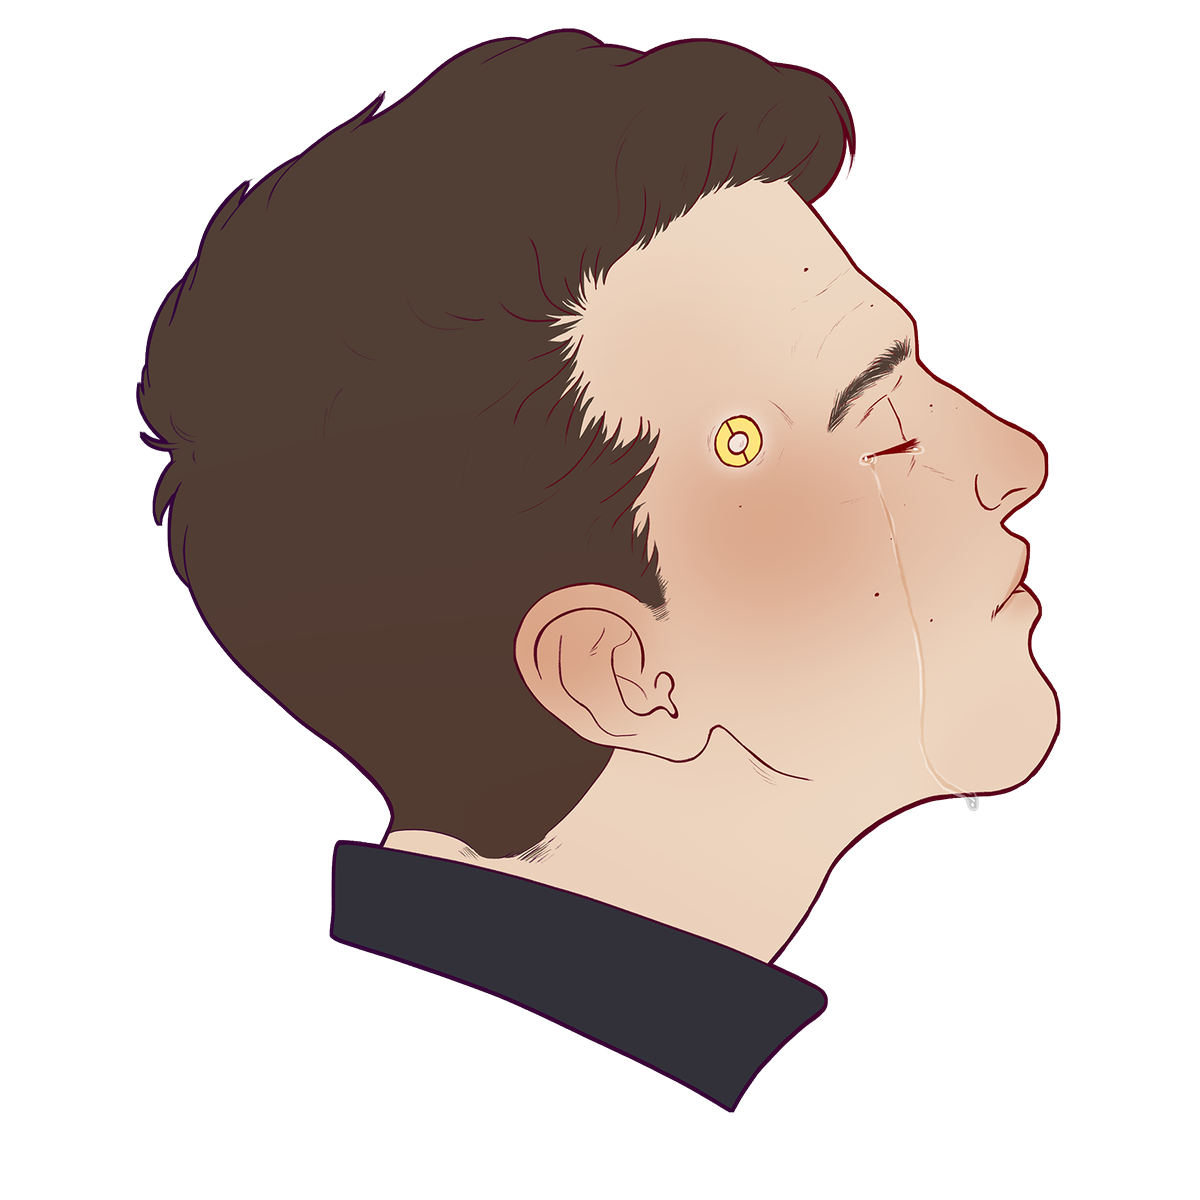 Skimlet On Twitter Cleaned Up My Detroitbecomehuman Sketch I Wanna Turn Them Into Stickers Down The Line Art Doodle Sketch Dbh